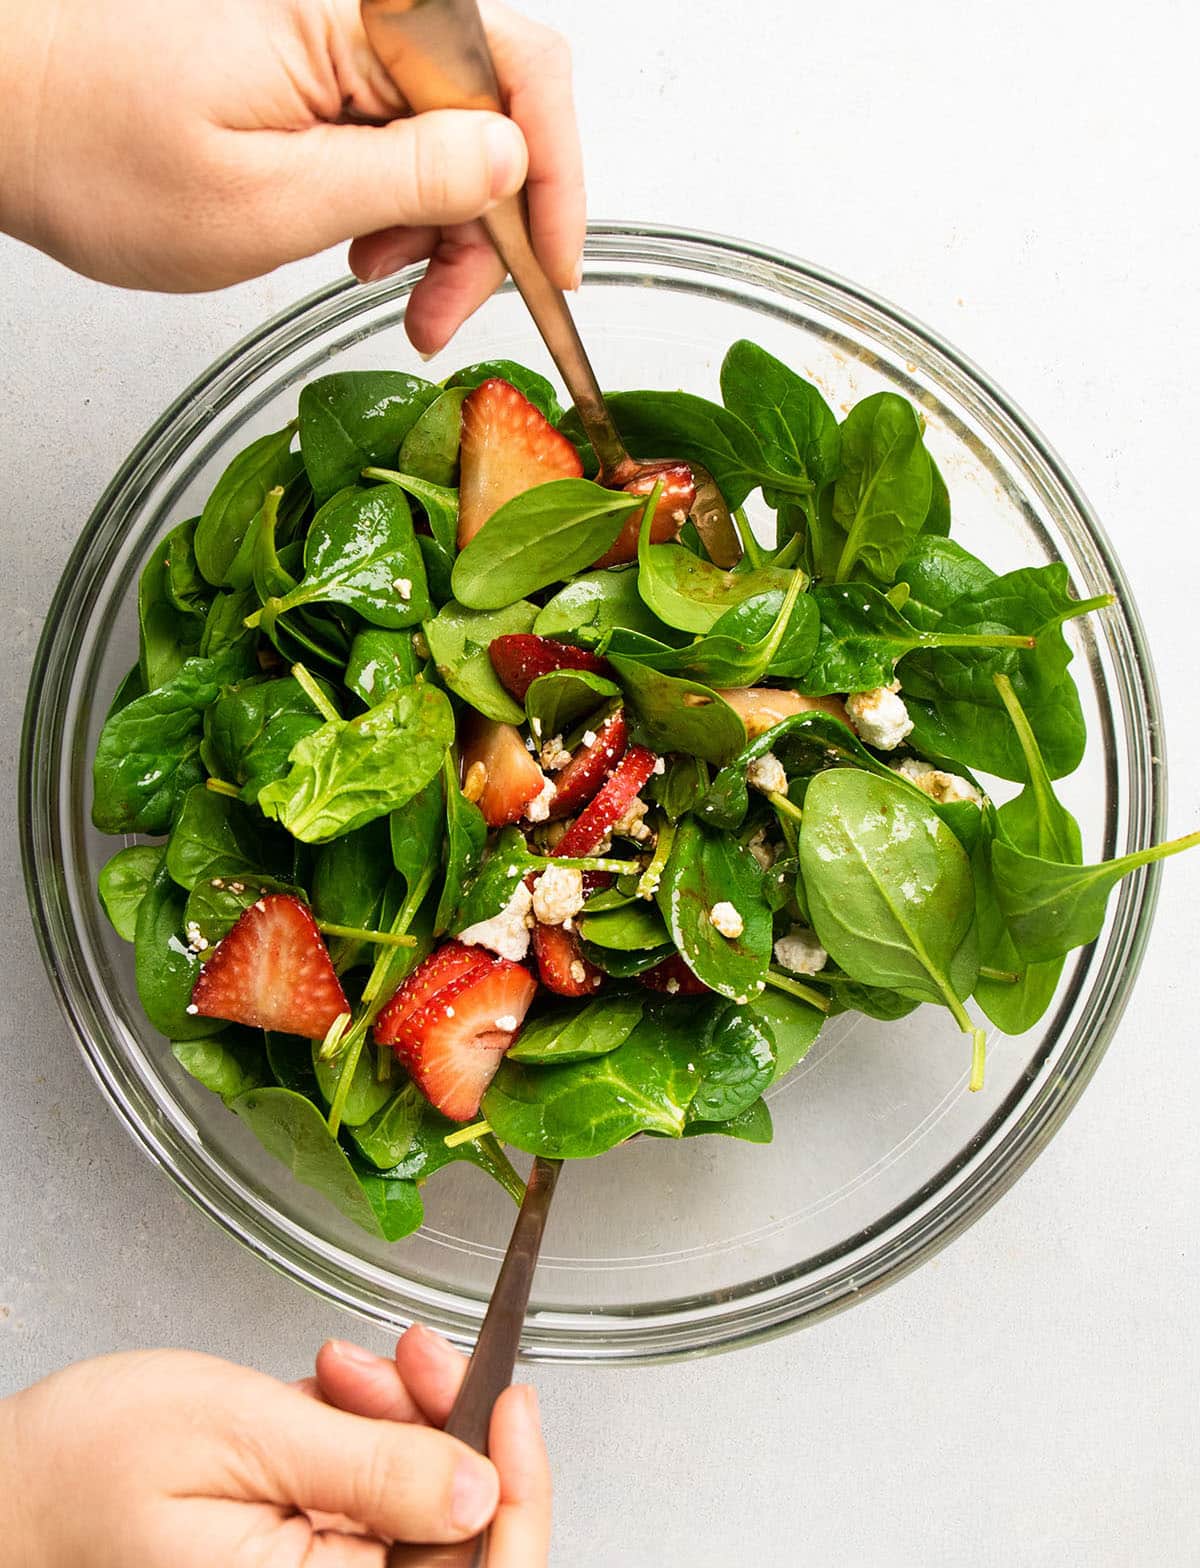 Tossing the salad together in a large bowl.